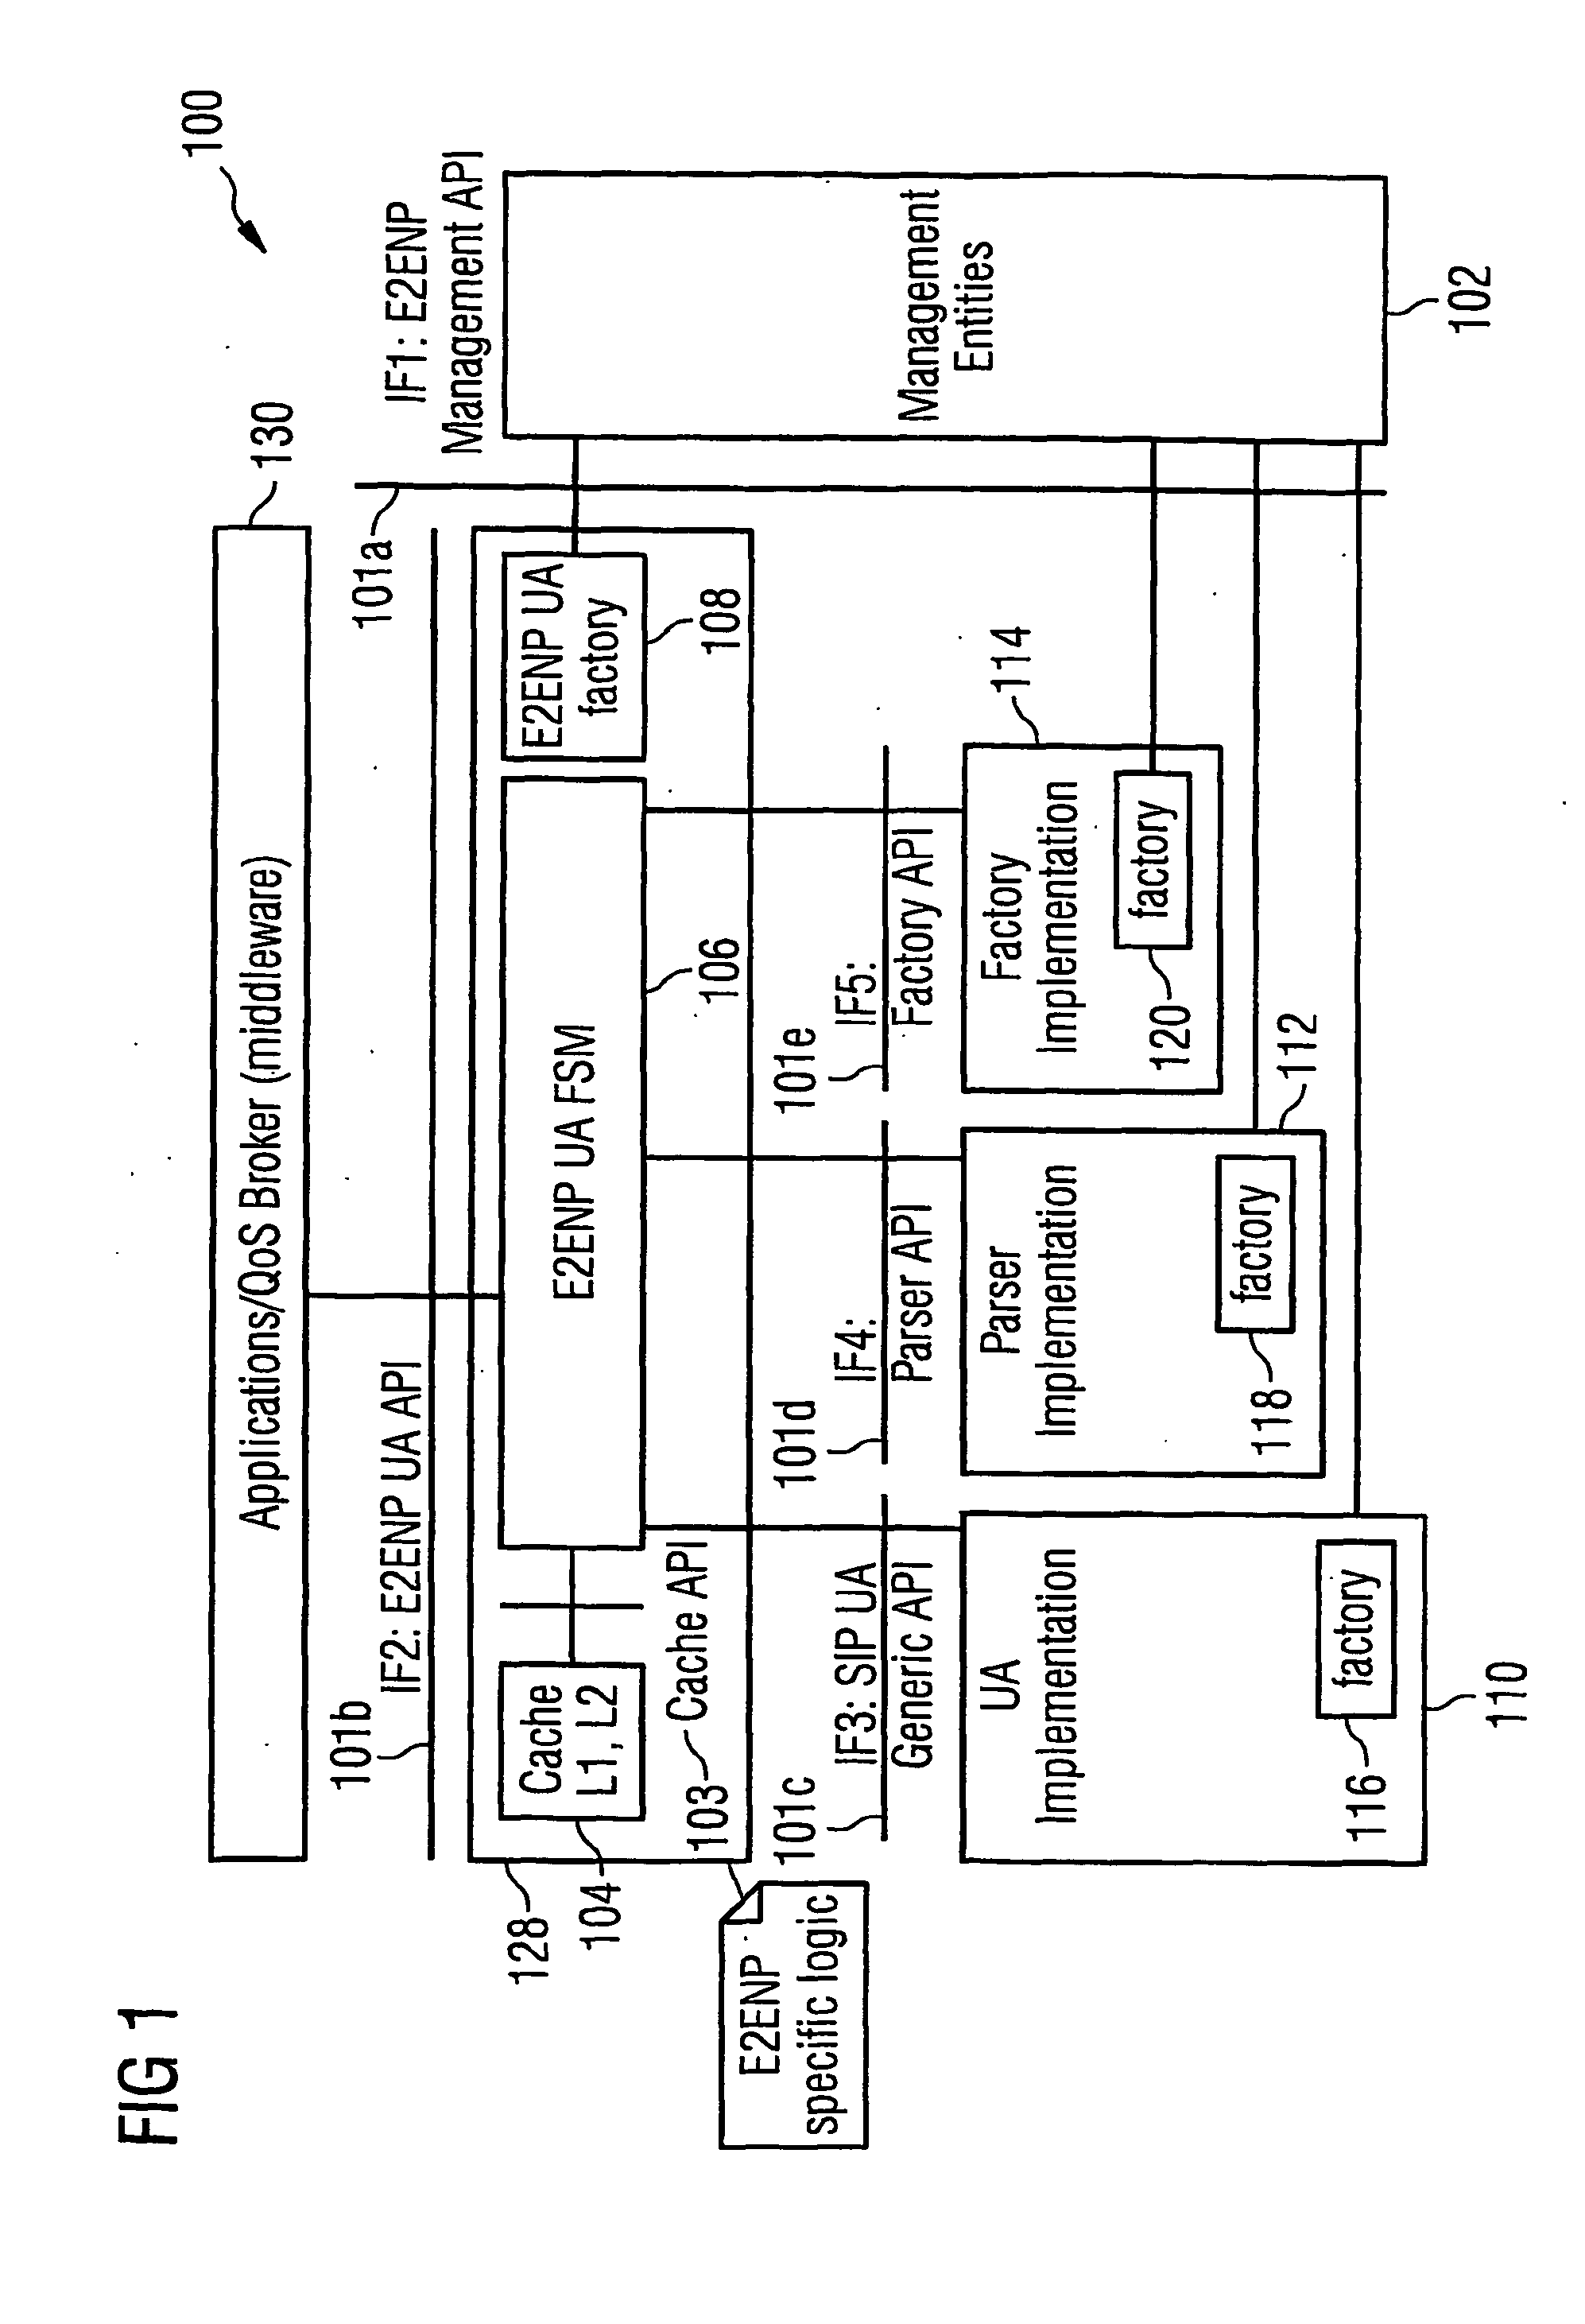 Specification of a software architecture for capability and quality-of-service negotiations and session establishment for distributed multimedia applications